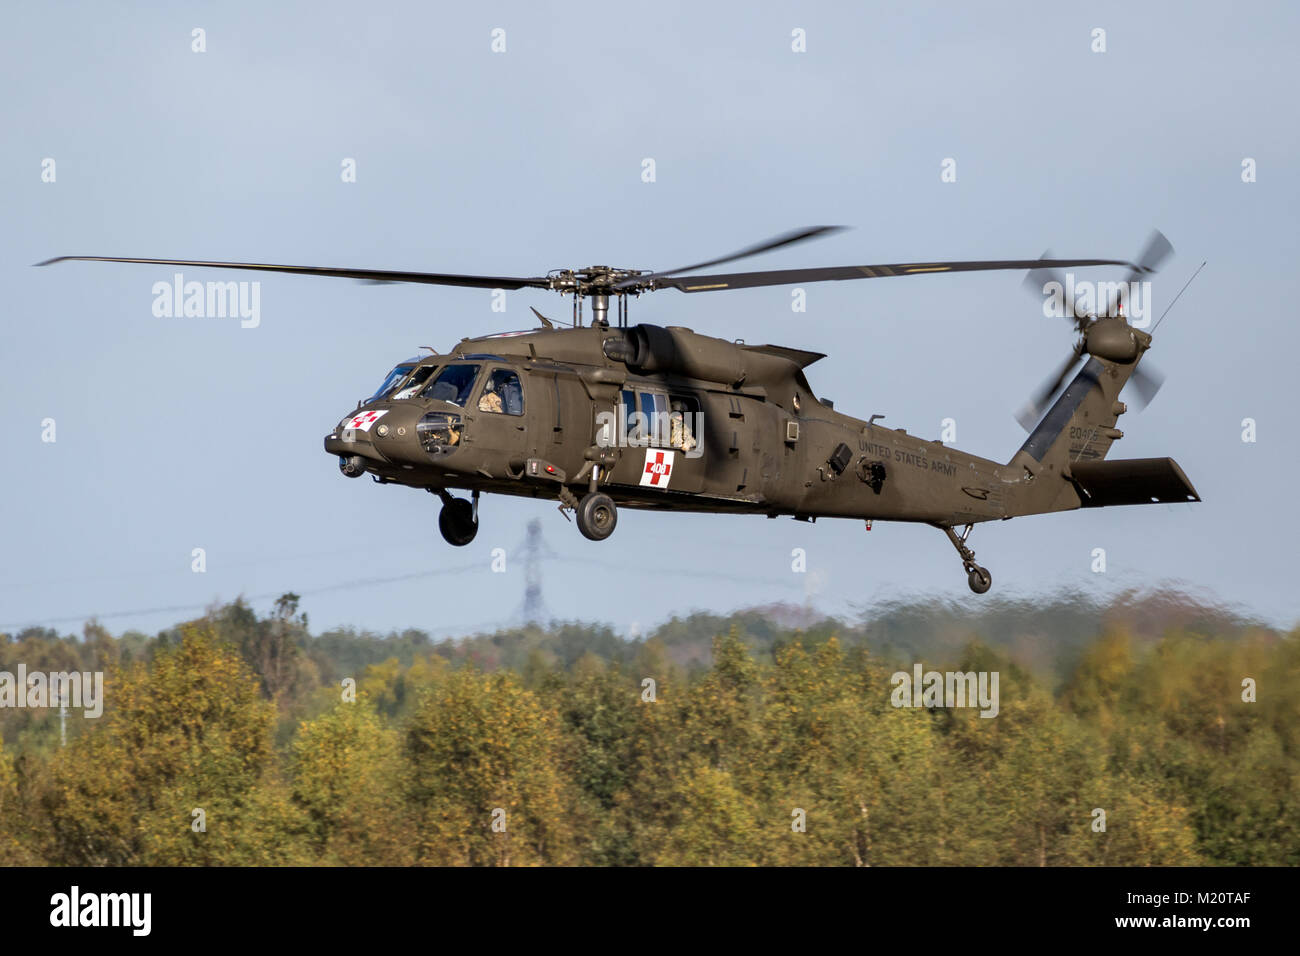 EINDHOVEN, THE NETHERLANDS - OCT 27, 2017: United States Army Sikorsky UH-60 Blackhawk transport helicopter in flight. Stock Photo